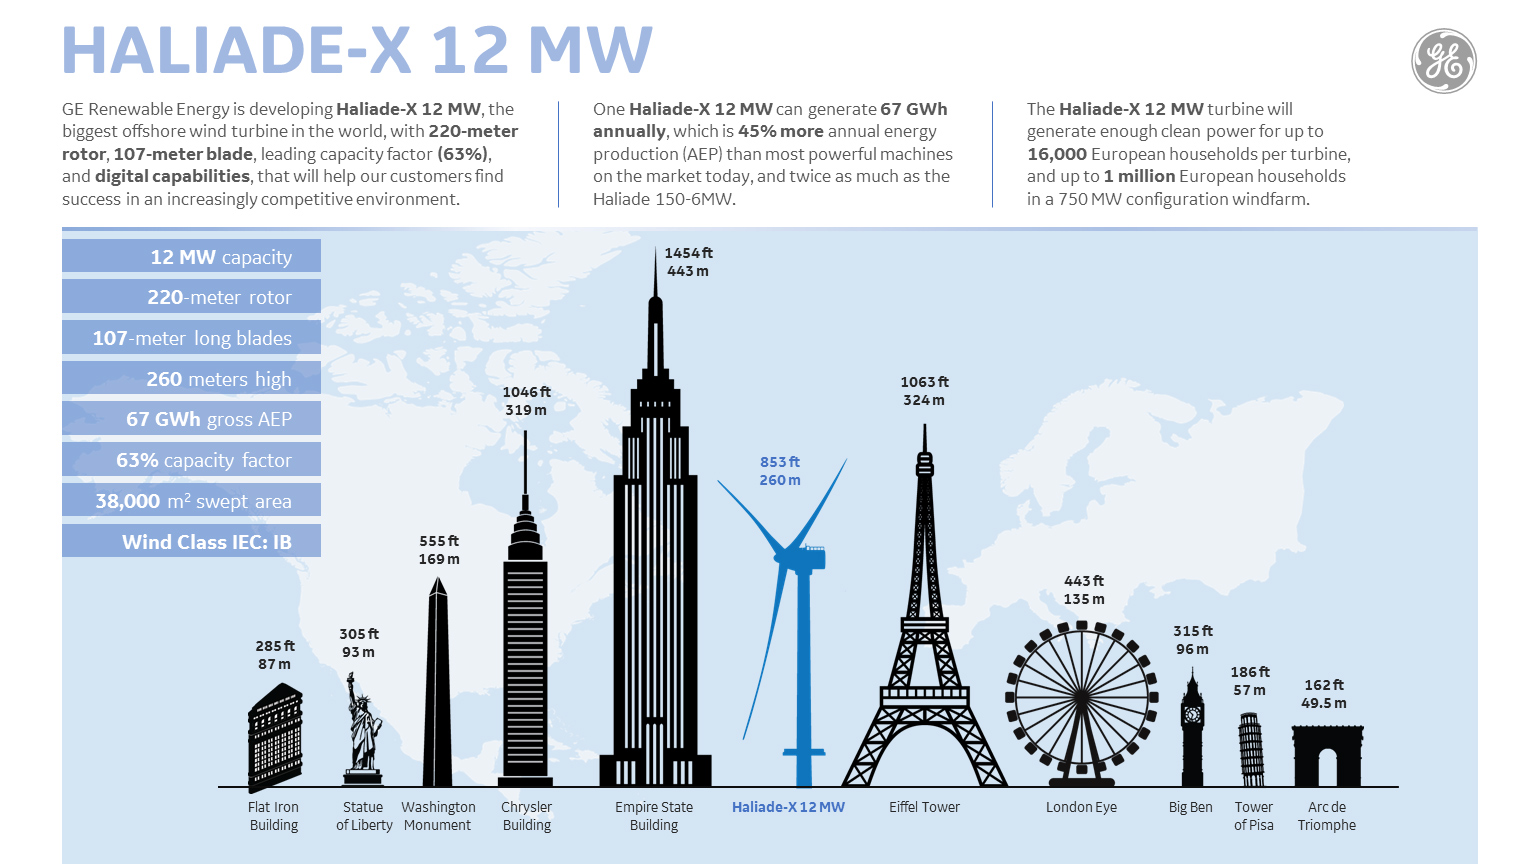 Comparison of height between an offshore floating unit and the Eiffel